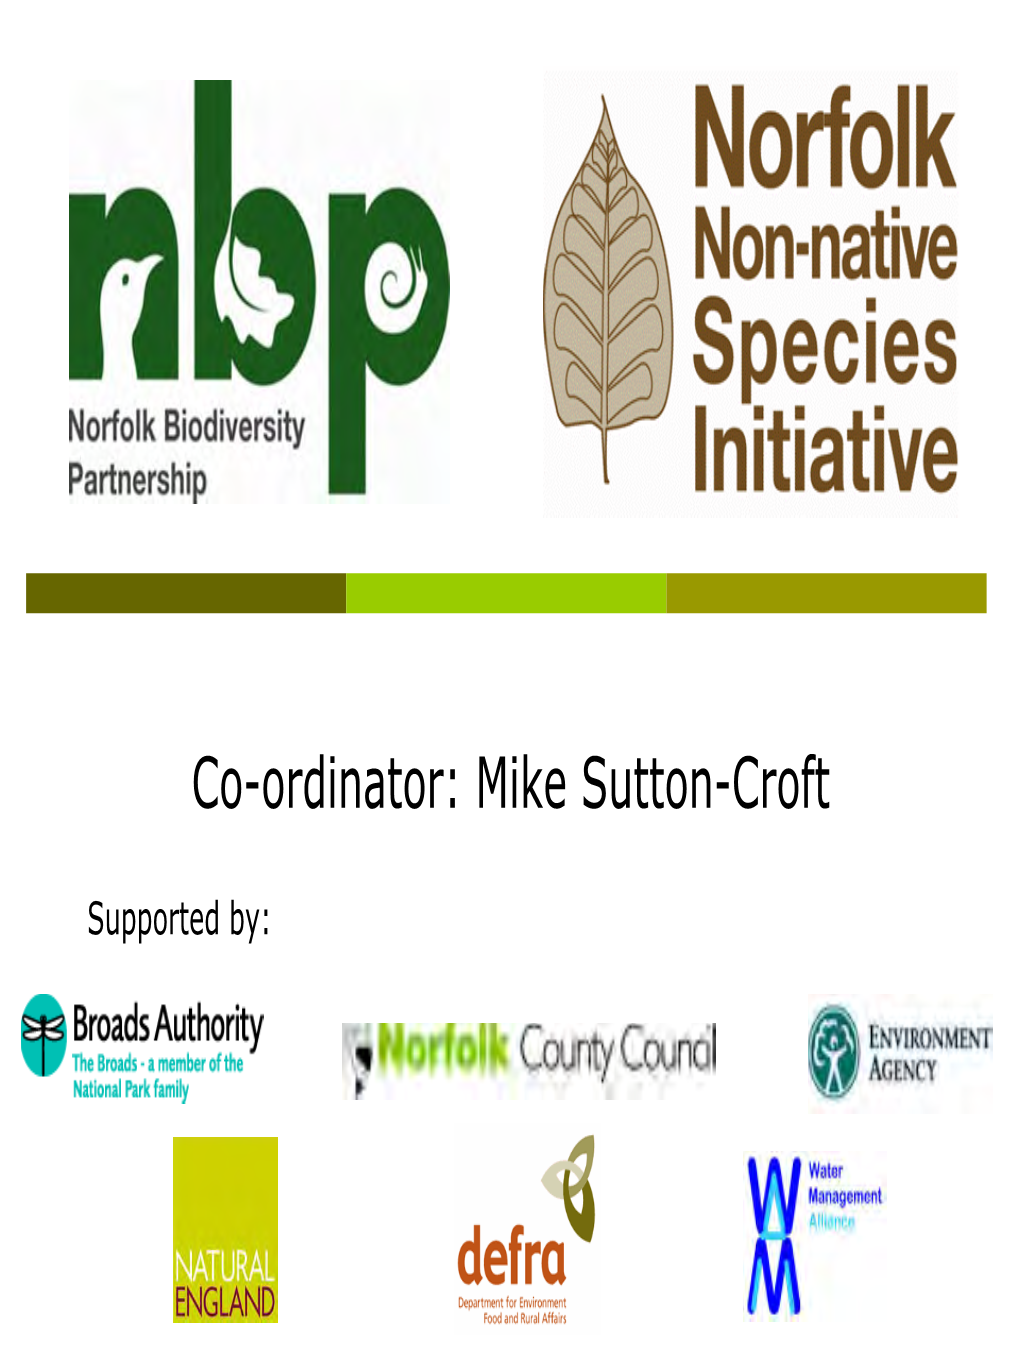 What Is an Invasive Non-Native Species?